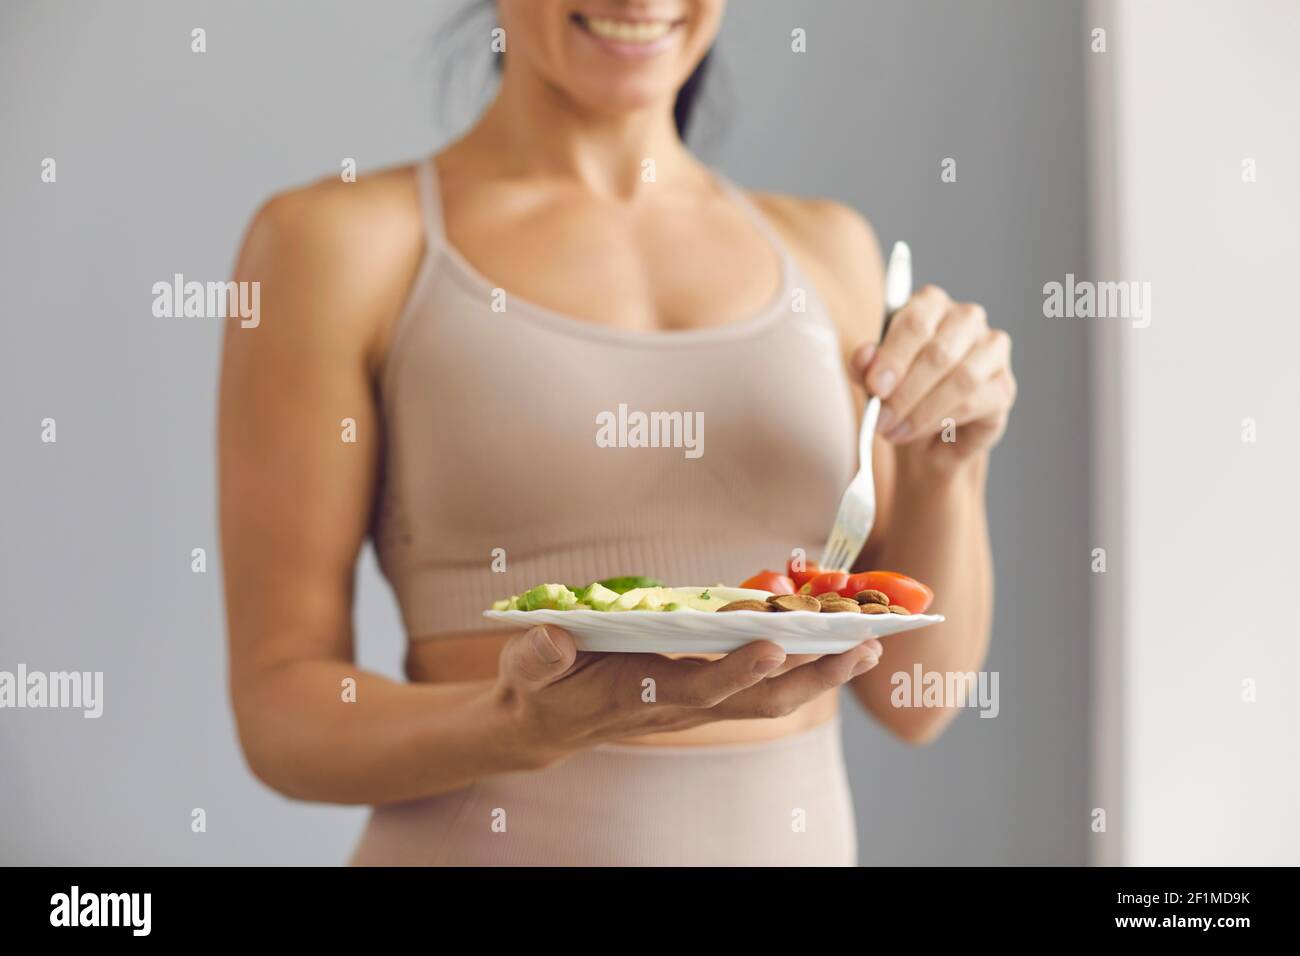 Happy fit woman smiling, holding a plate and enjoying her healthy vegetarian meal Stock Photo